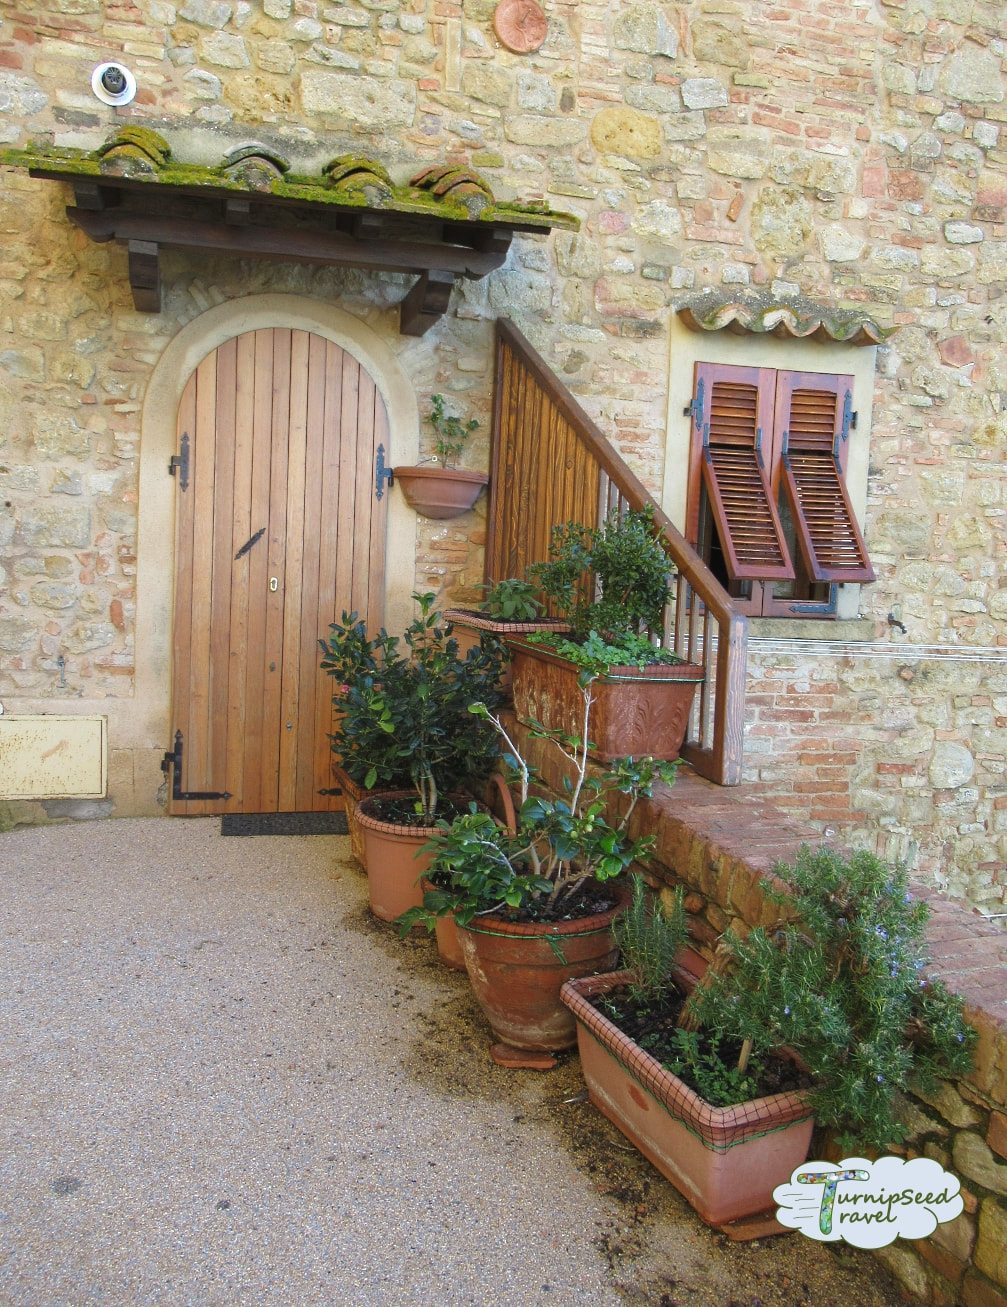 Garden flowers, plants, and colorful homes in Volterra Tuscany